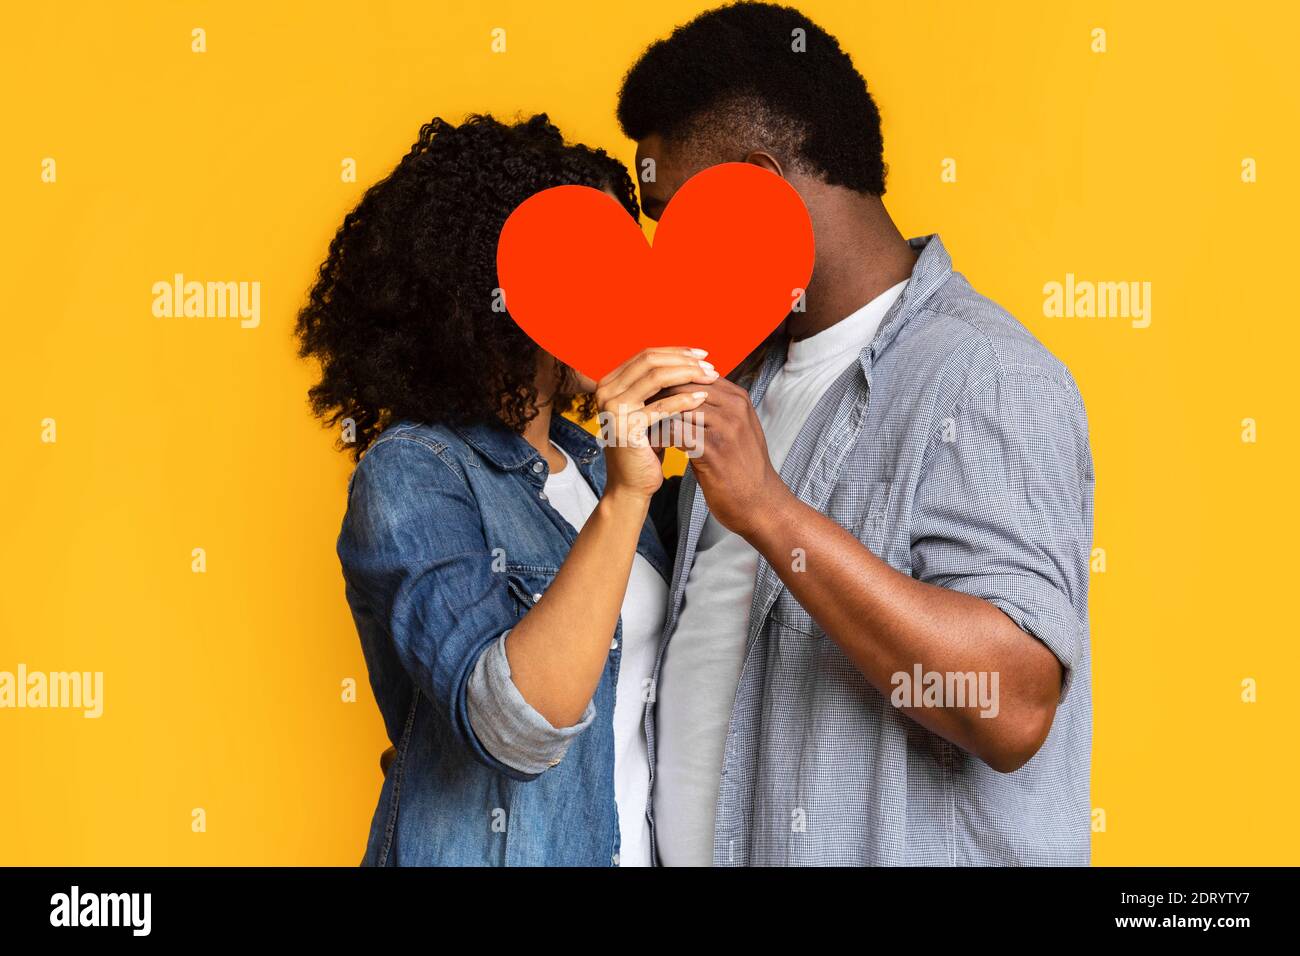 Secret Love. Romantic black couple hiding and kissing behind red paper heart Stock Photo